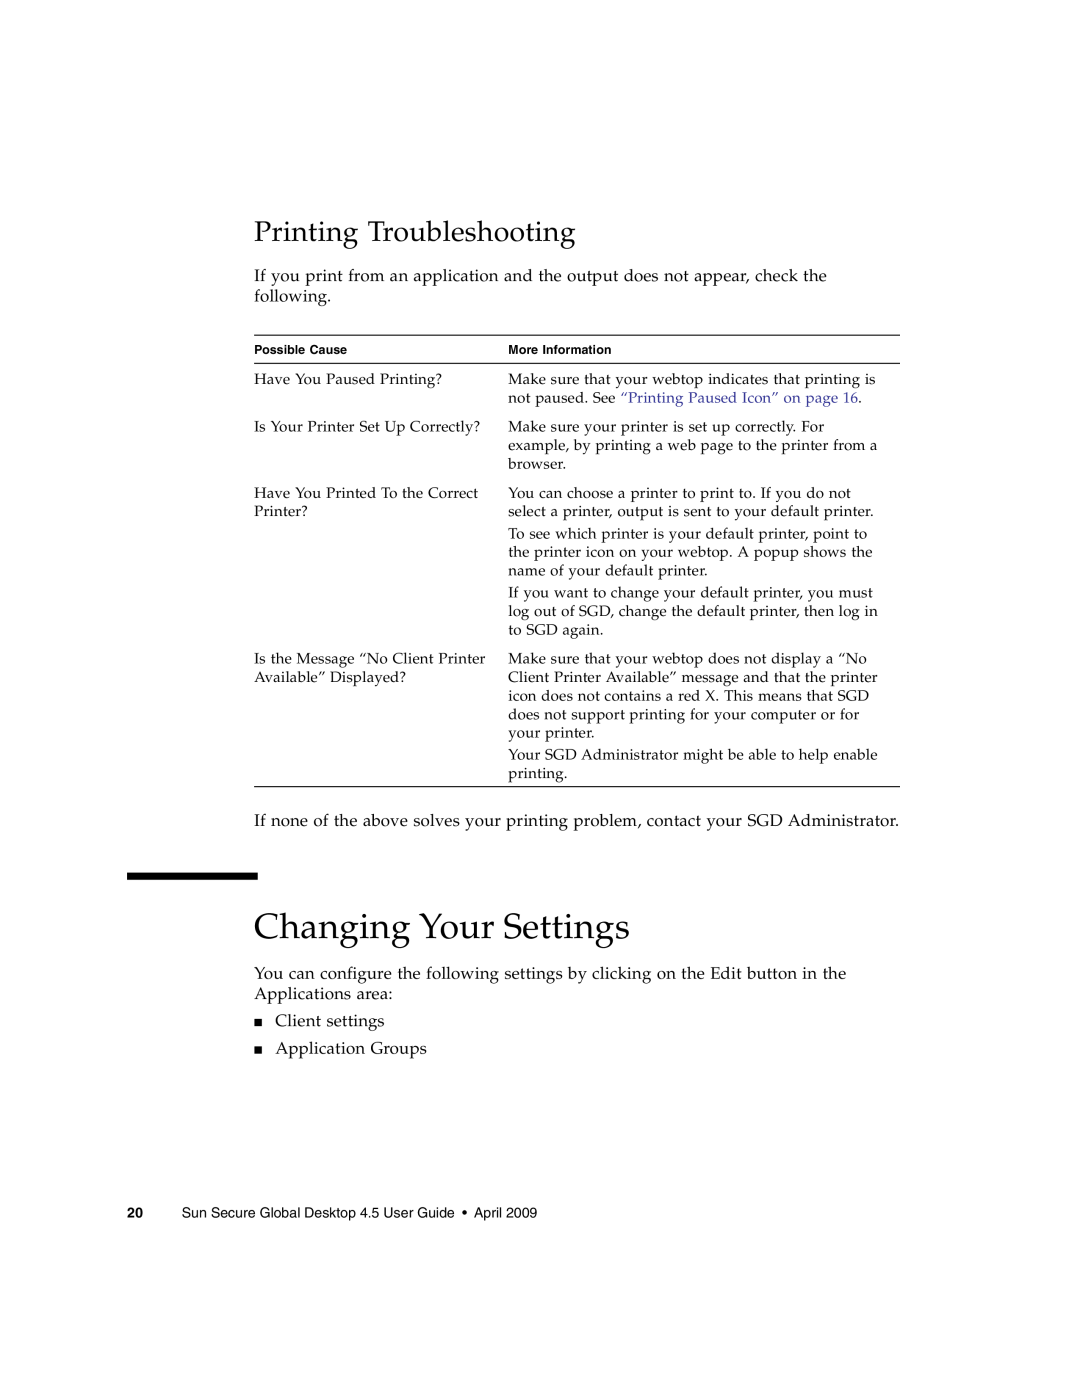 Sun Microsystems 4.5 manual Changing Your Settings, Printing Troubleshooting 